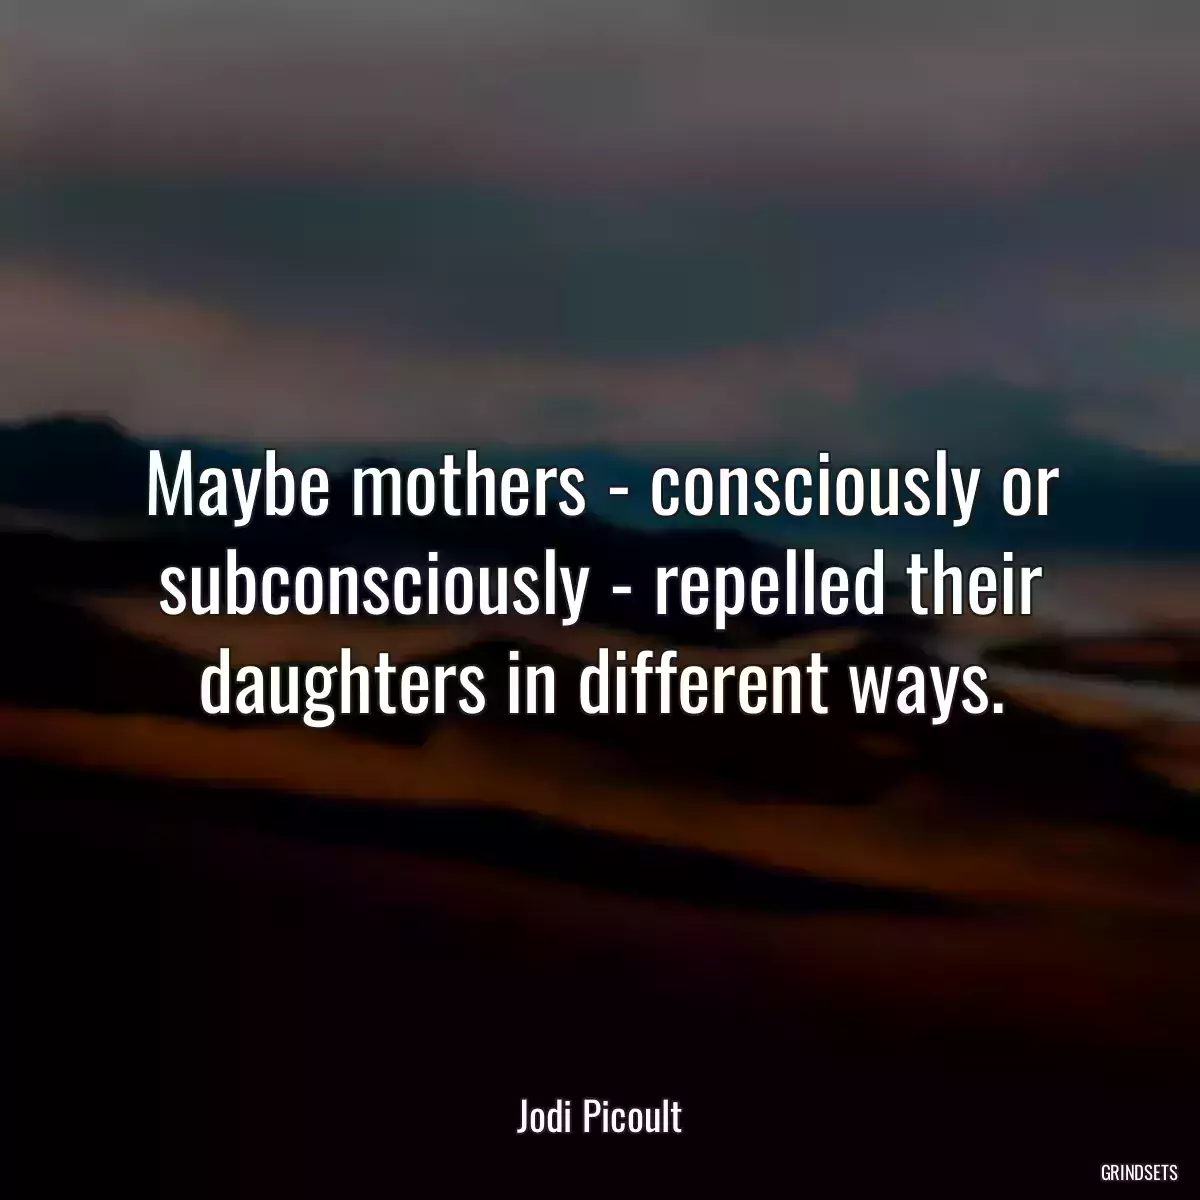 Maybe mothers - consciously or subconsciously - repelled their daughters in different ways.